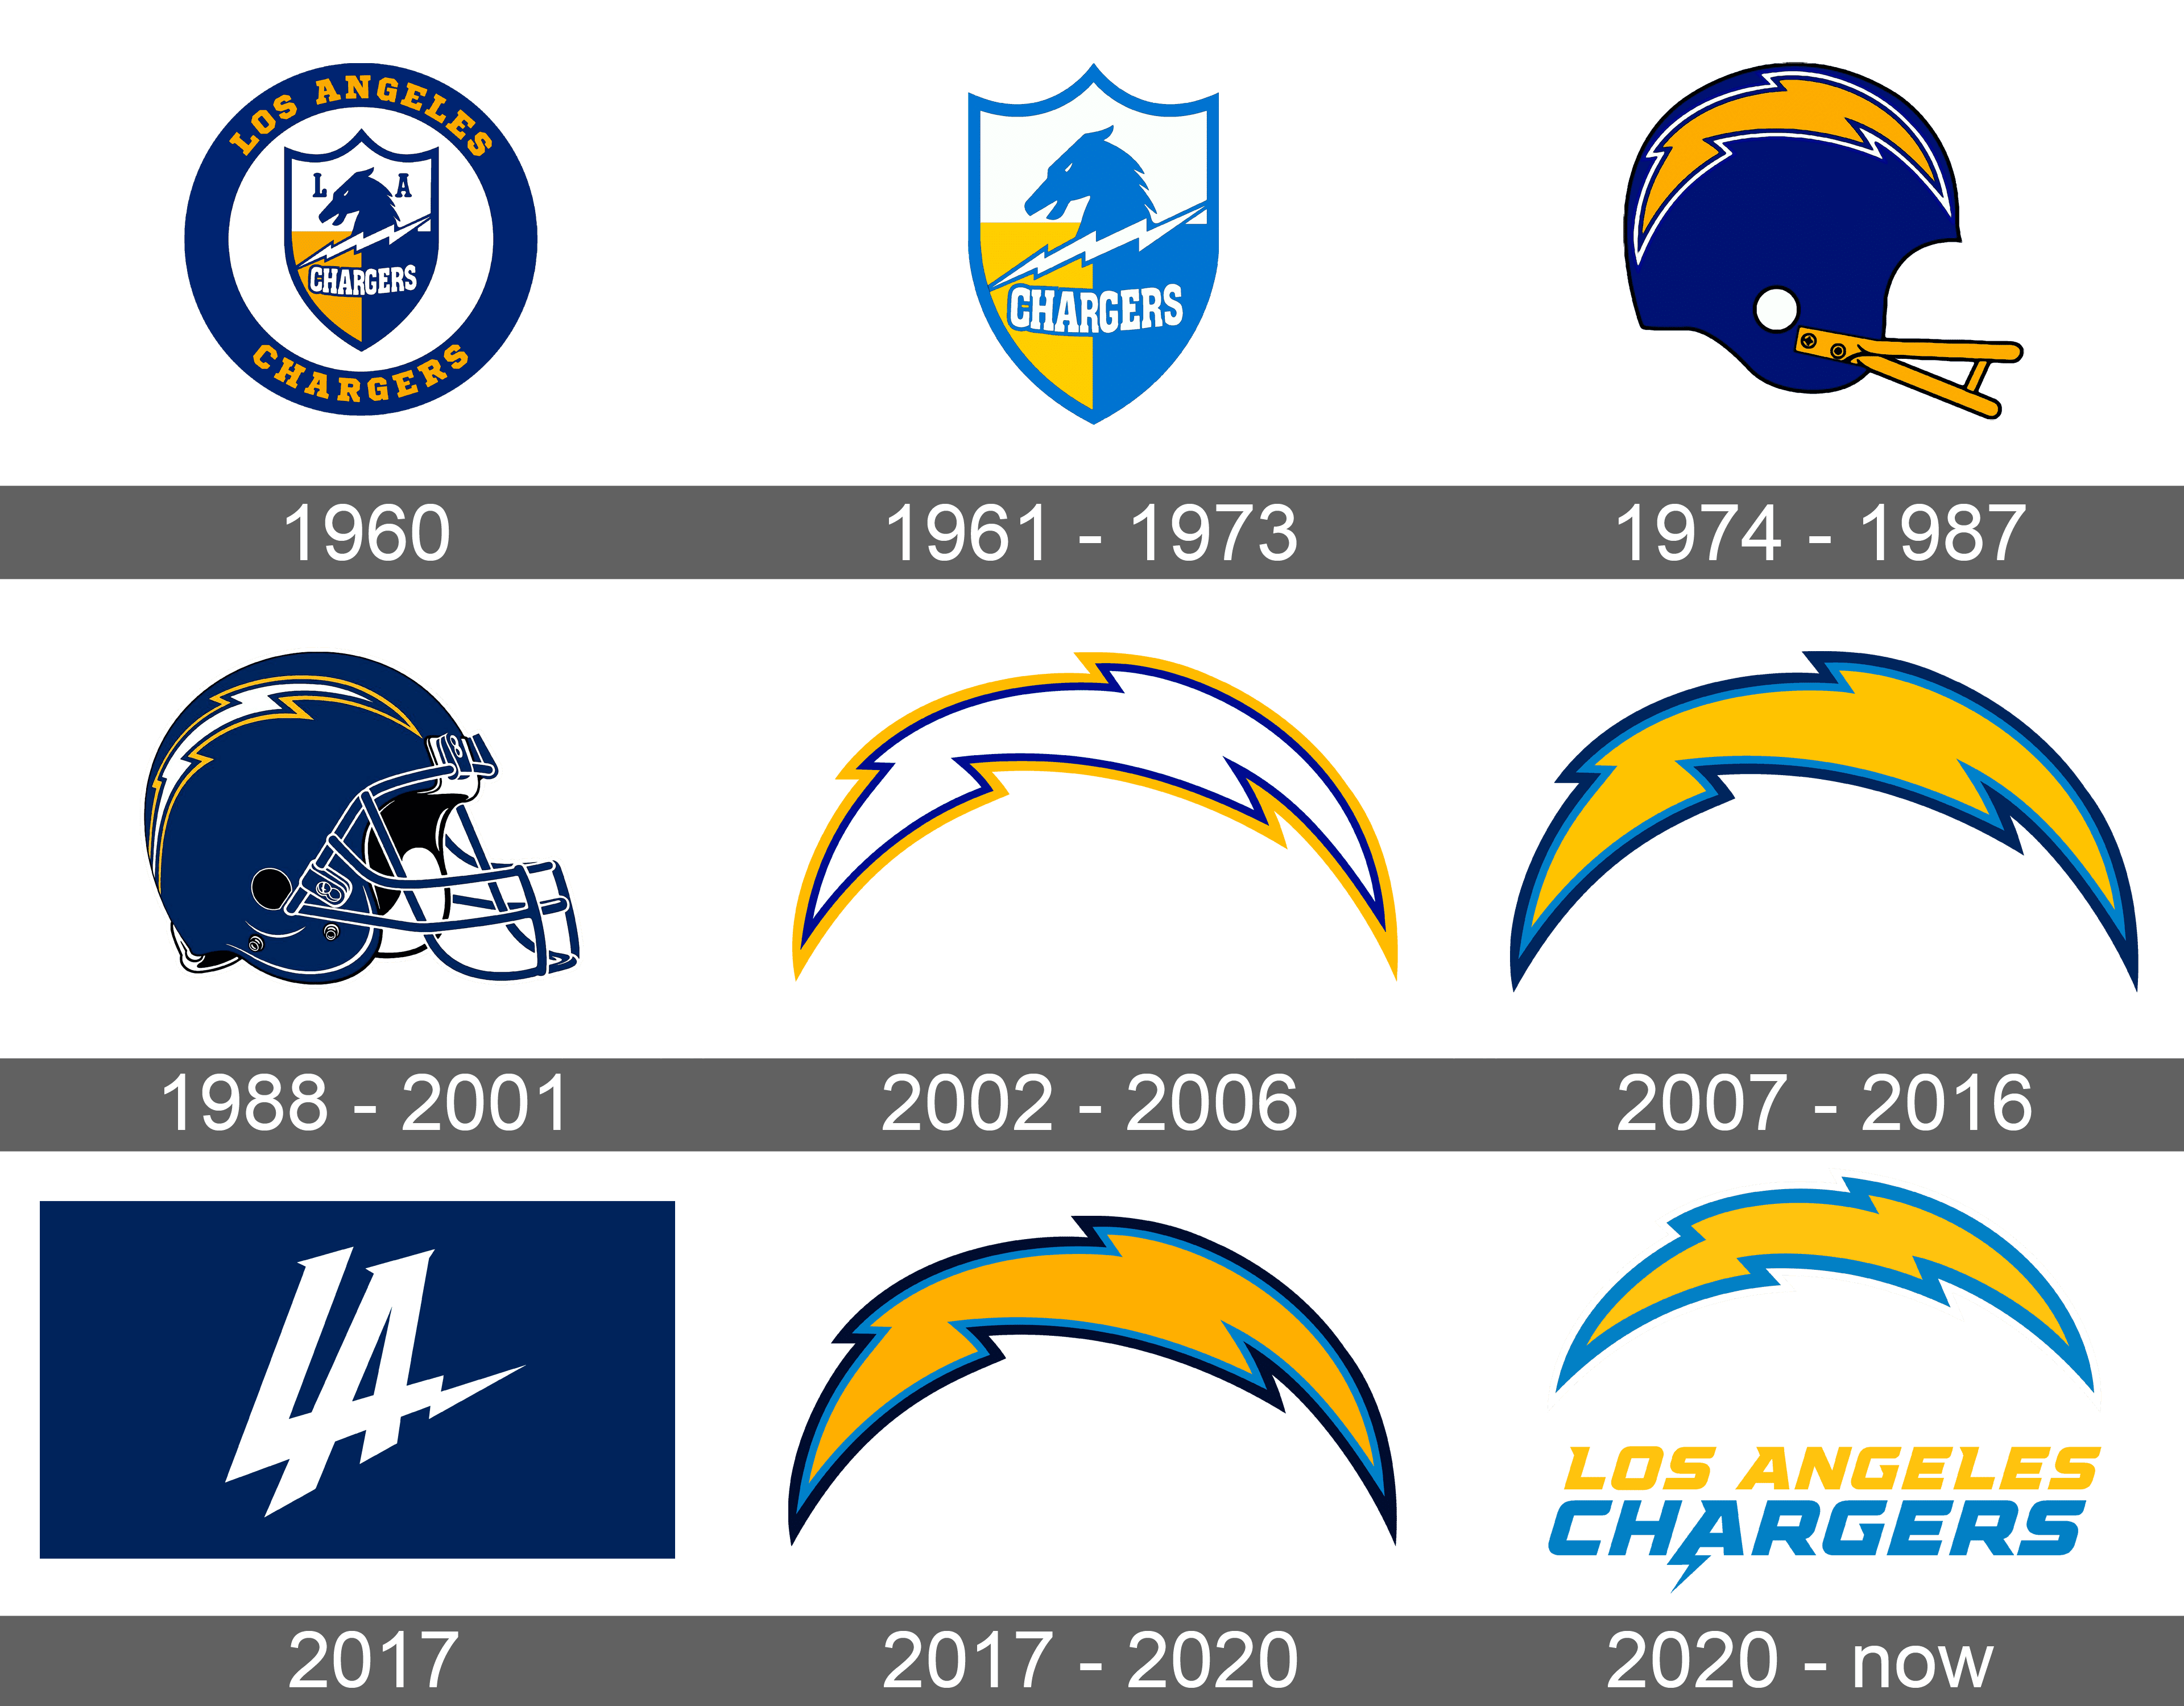 San Diego Chargers Logo and sign, new logo meaning and history